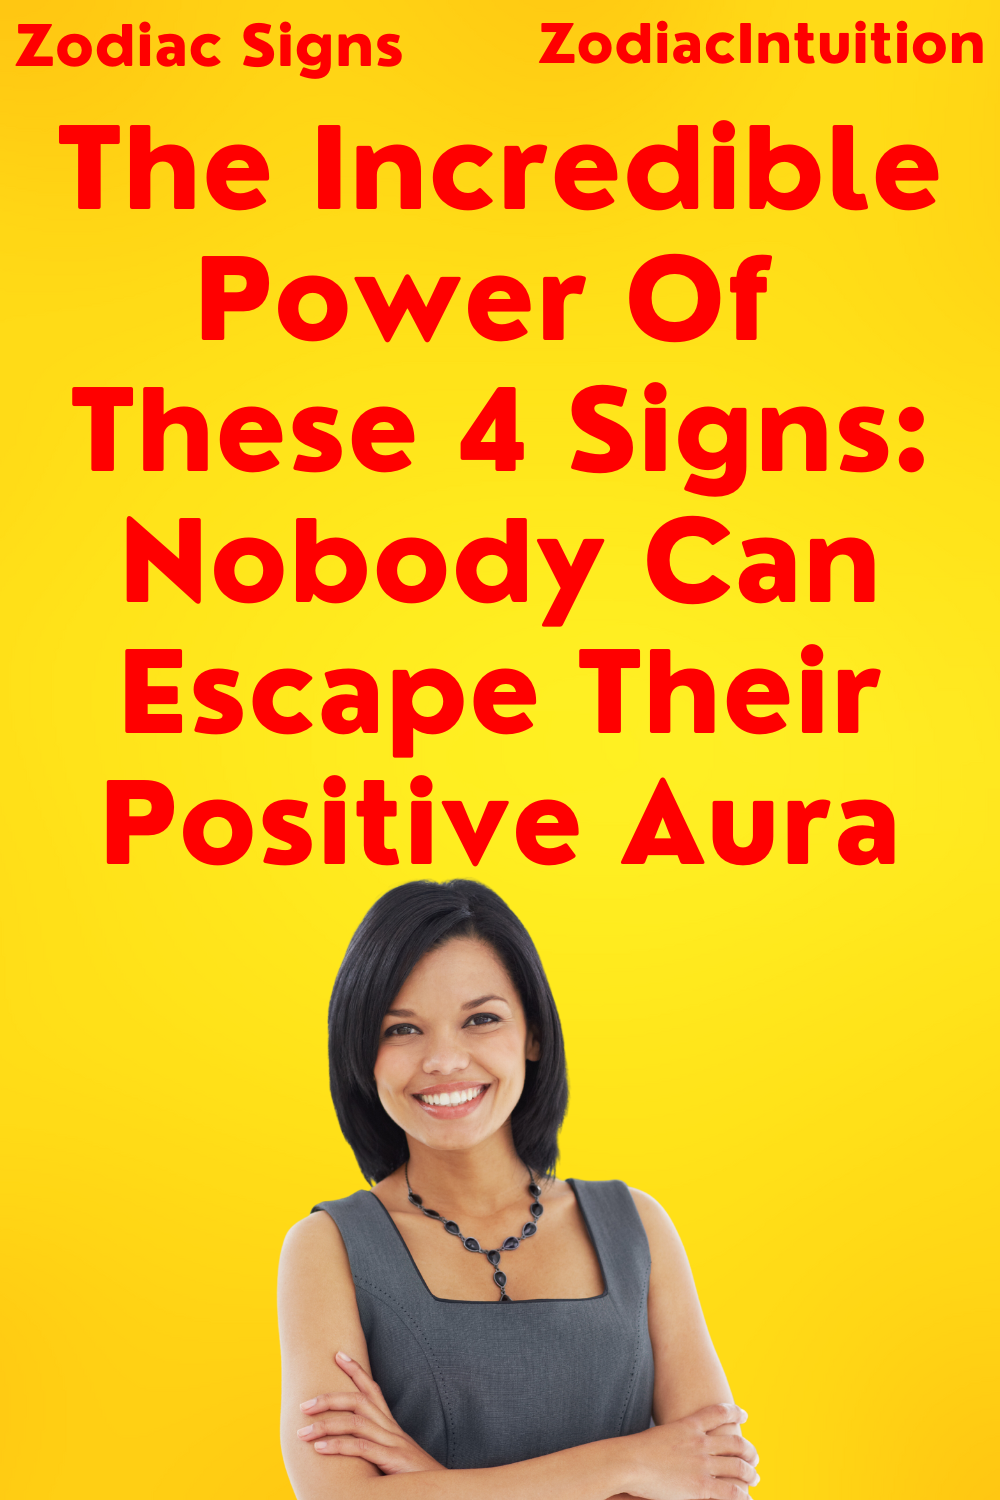 The Incredible Power Of These 4 Signs: Nobody Can Escape Their Positive Aura